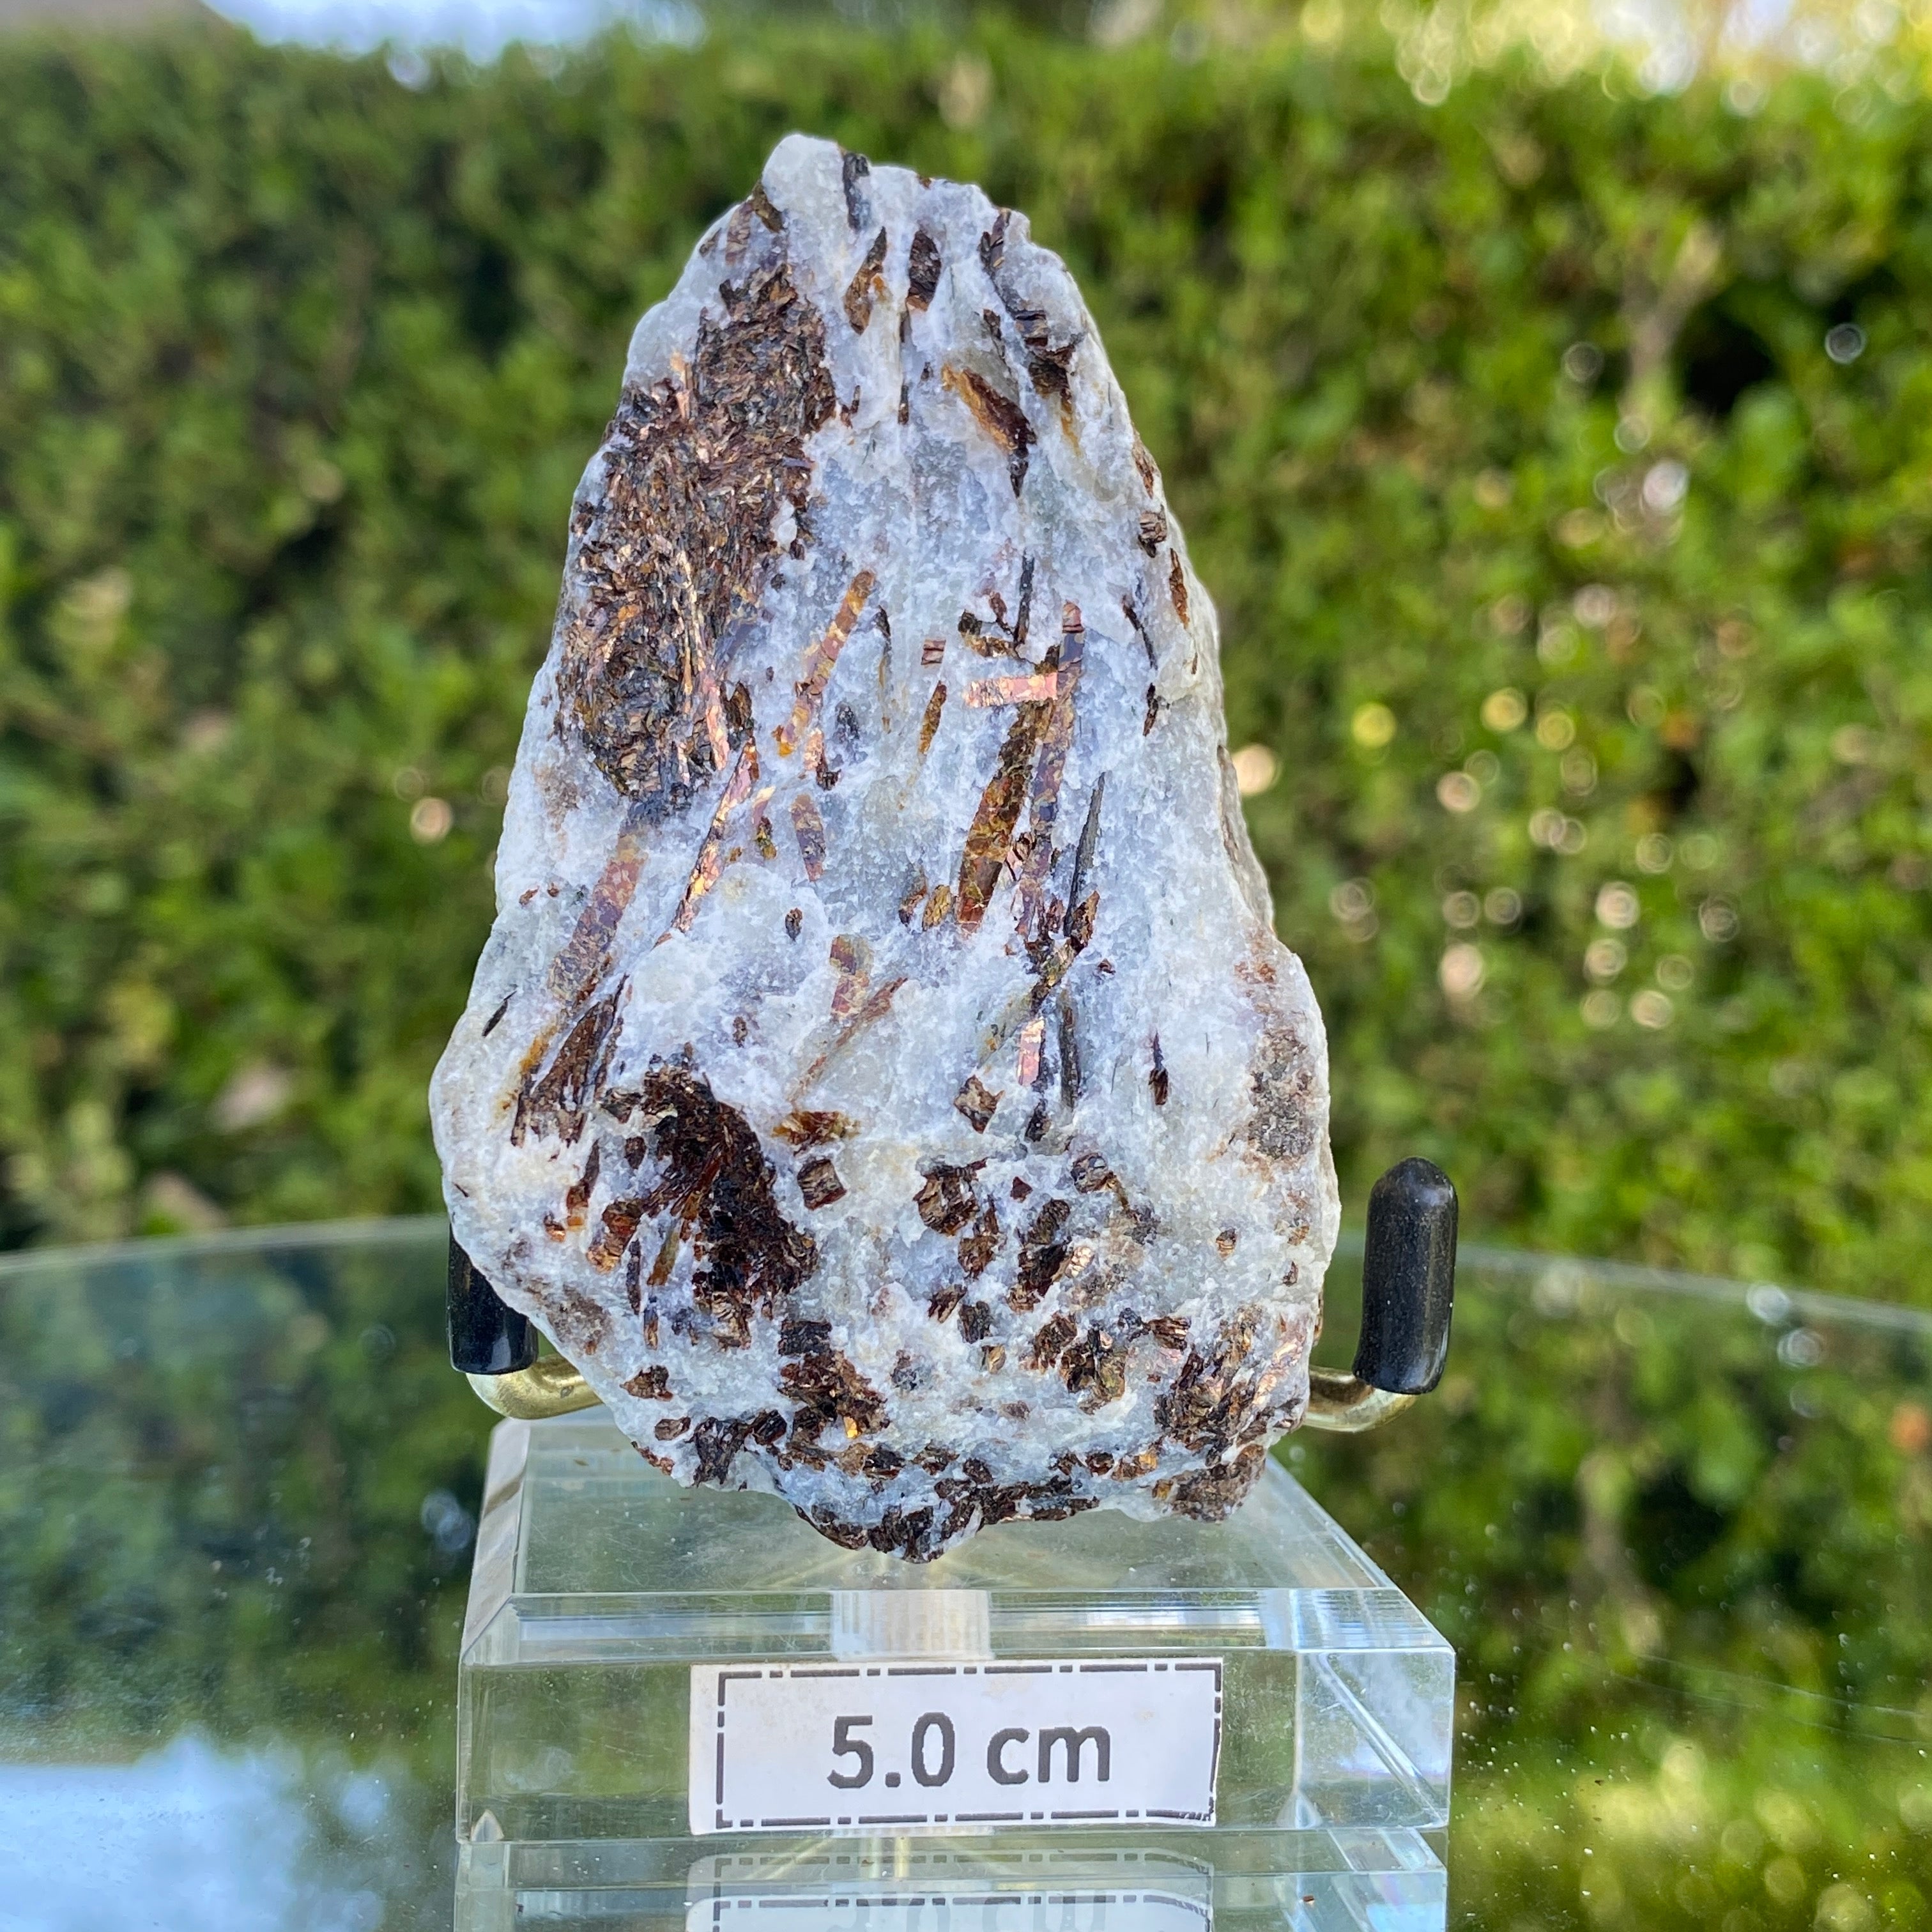 128.0g 8x5x3cm Gold Astrophyllite from Russia